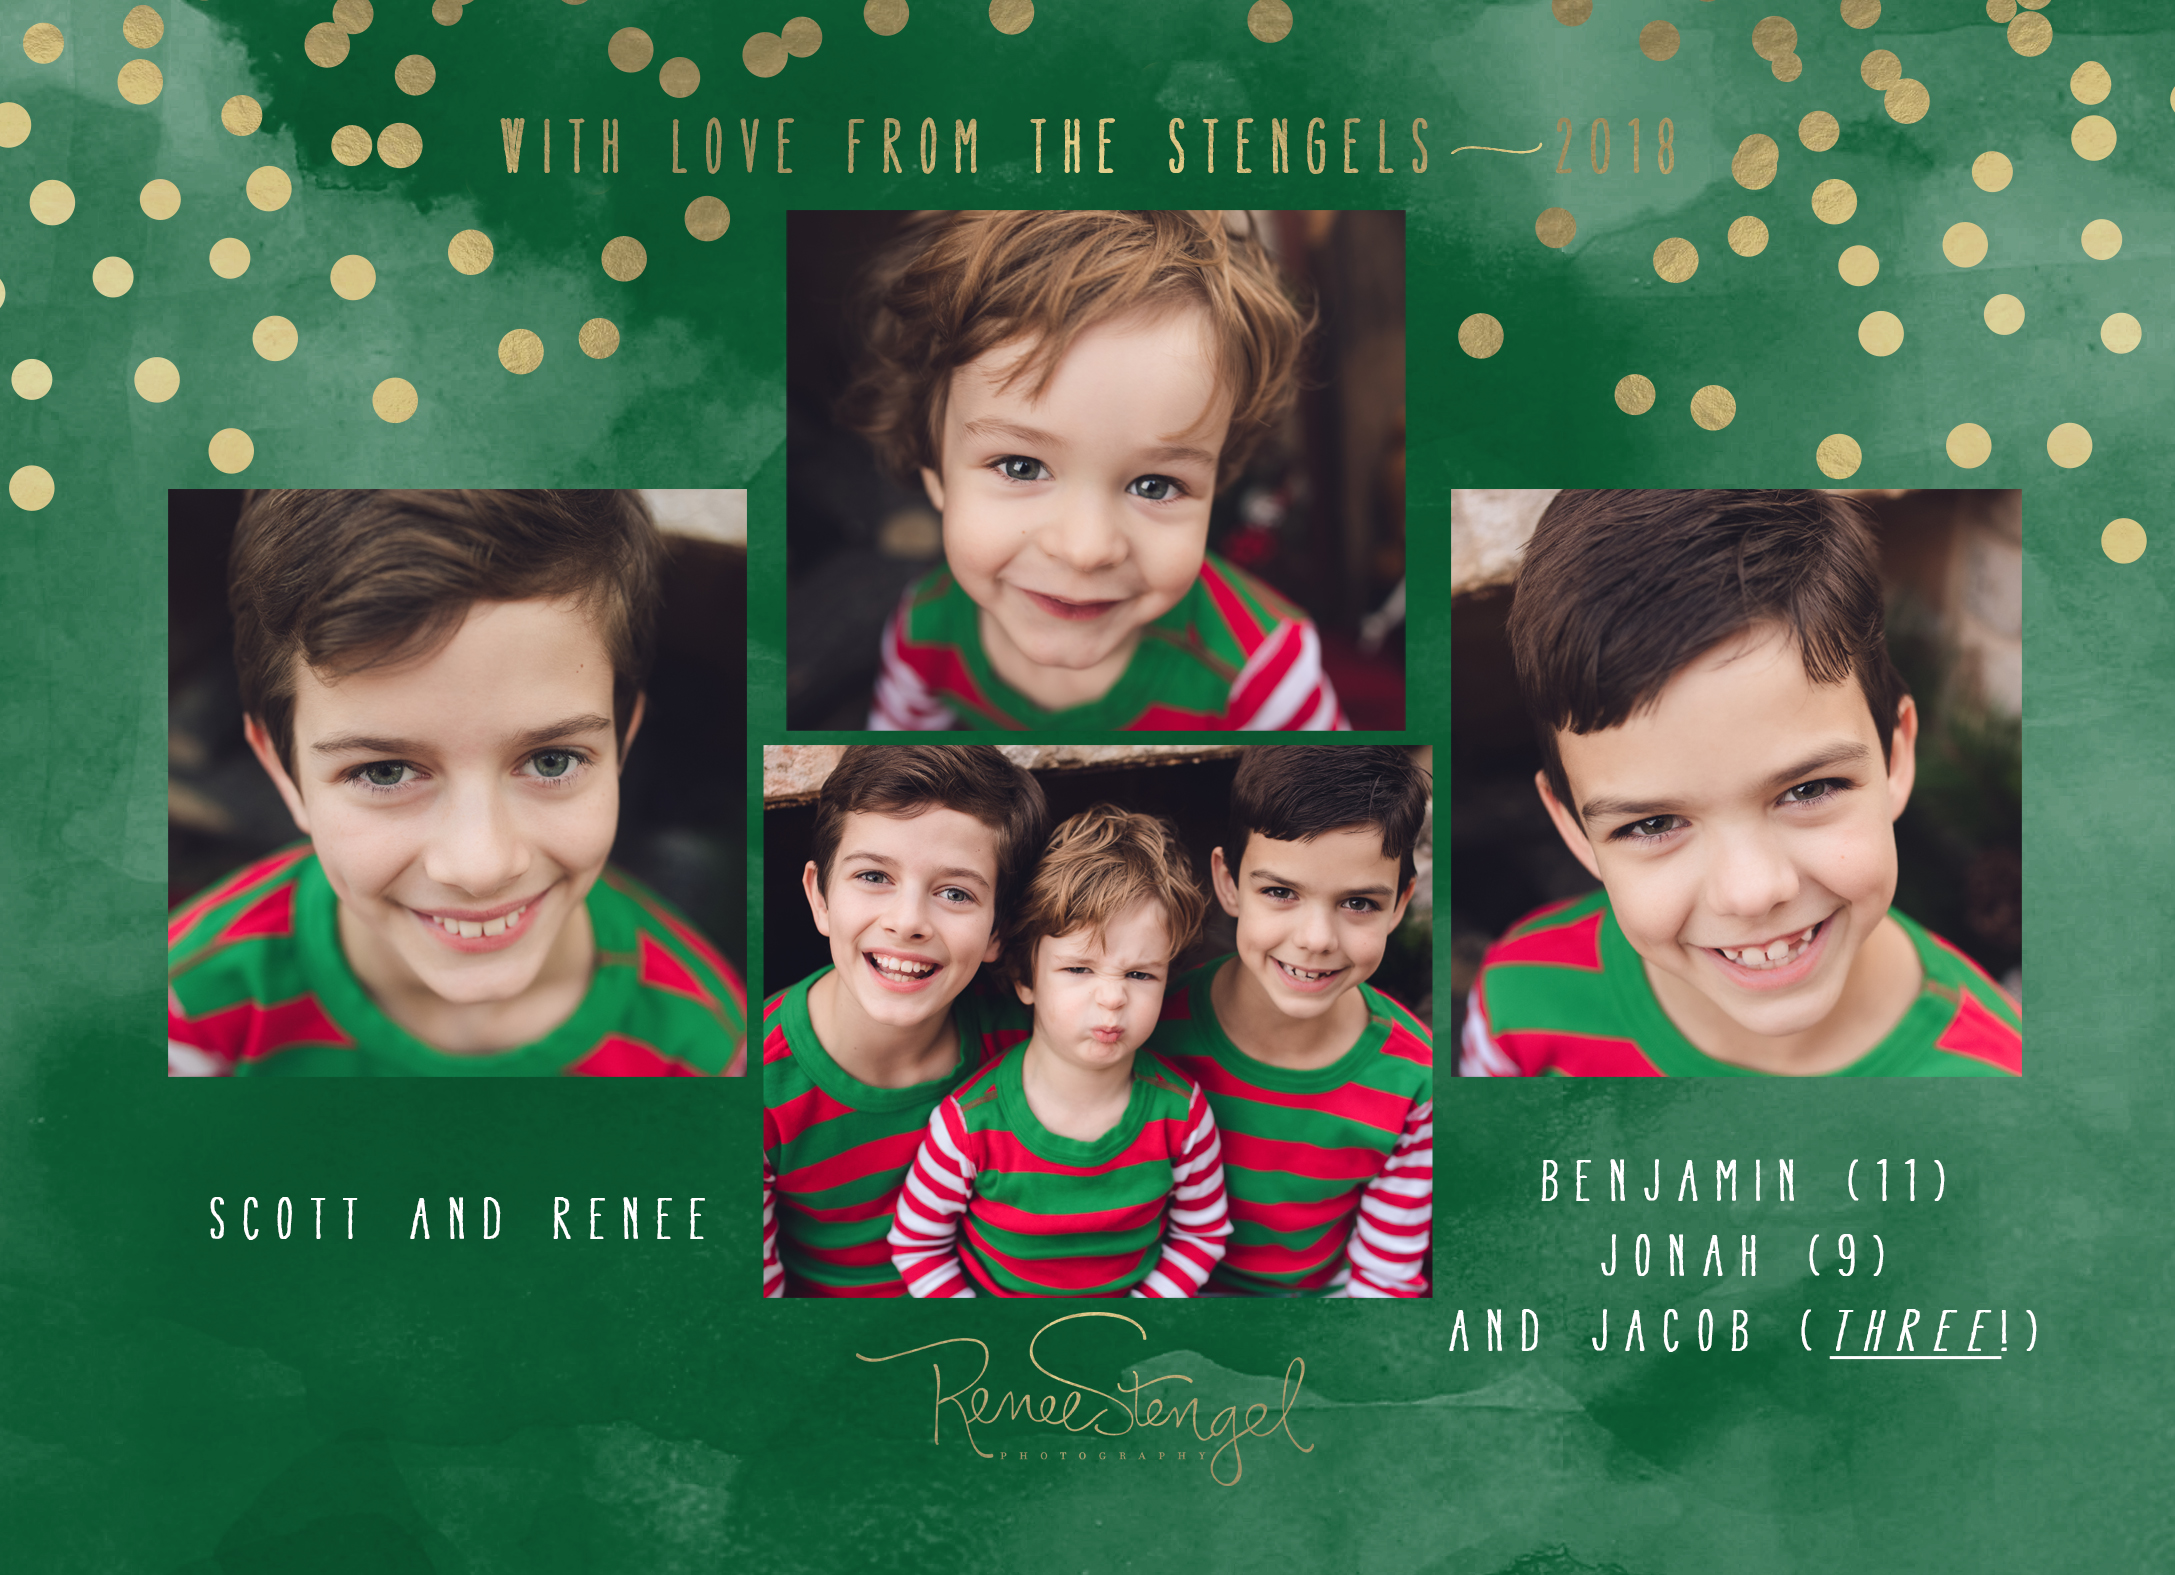 RENEE STENGEL Photography | Charlotte Underwater and Portrait Photographer | Holiday Card Custom Design Green and Gold Dots